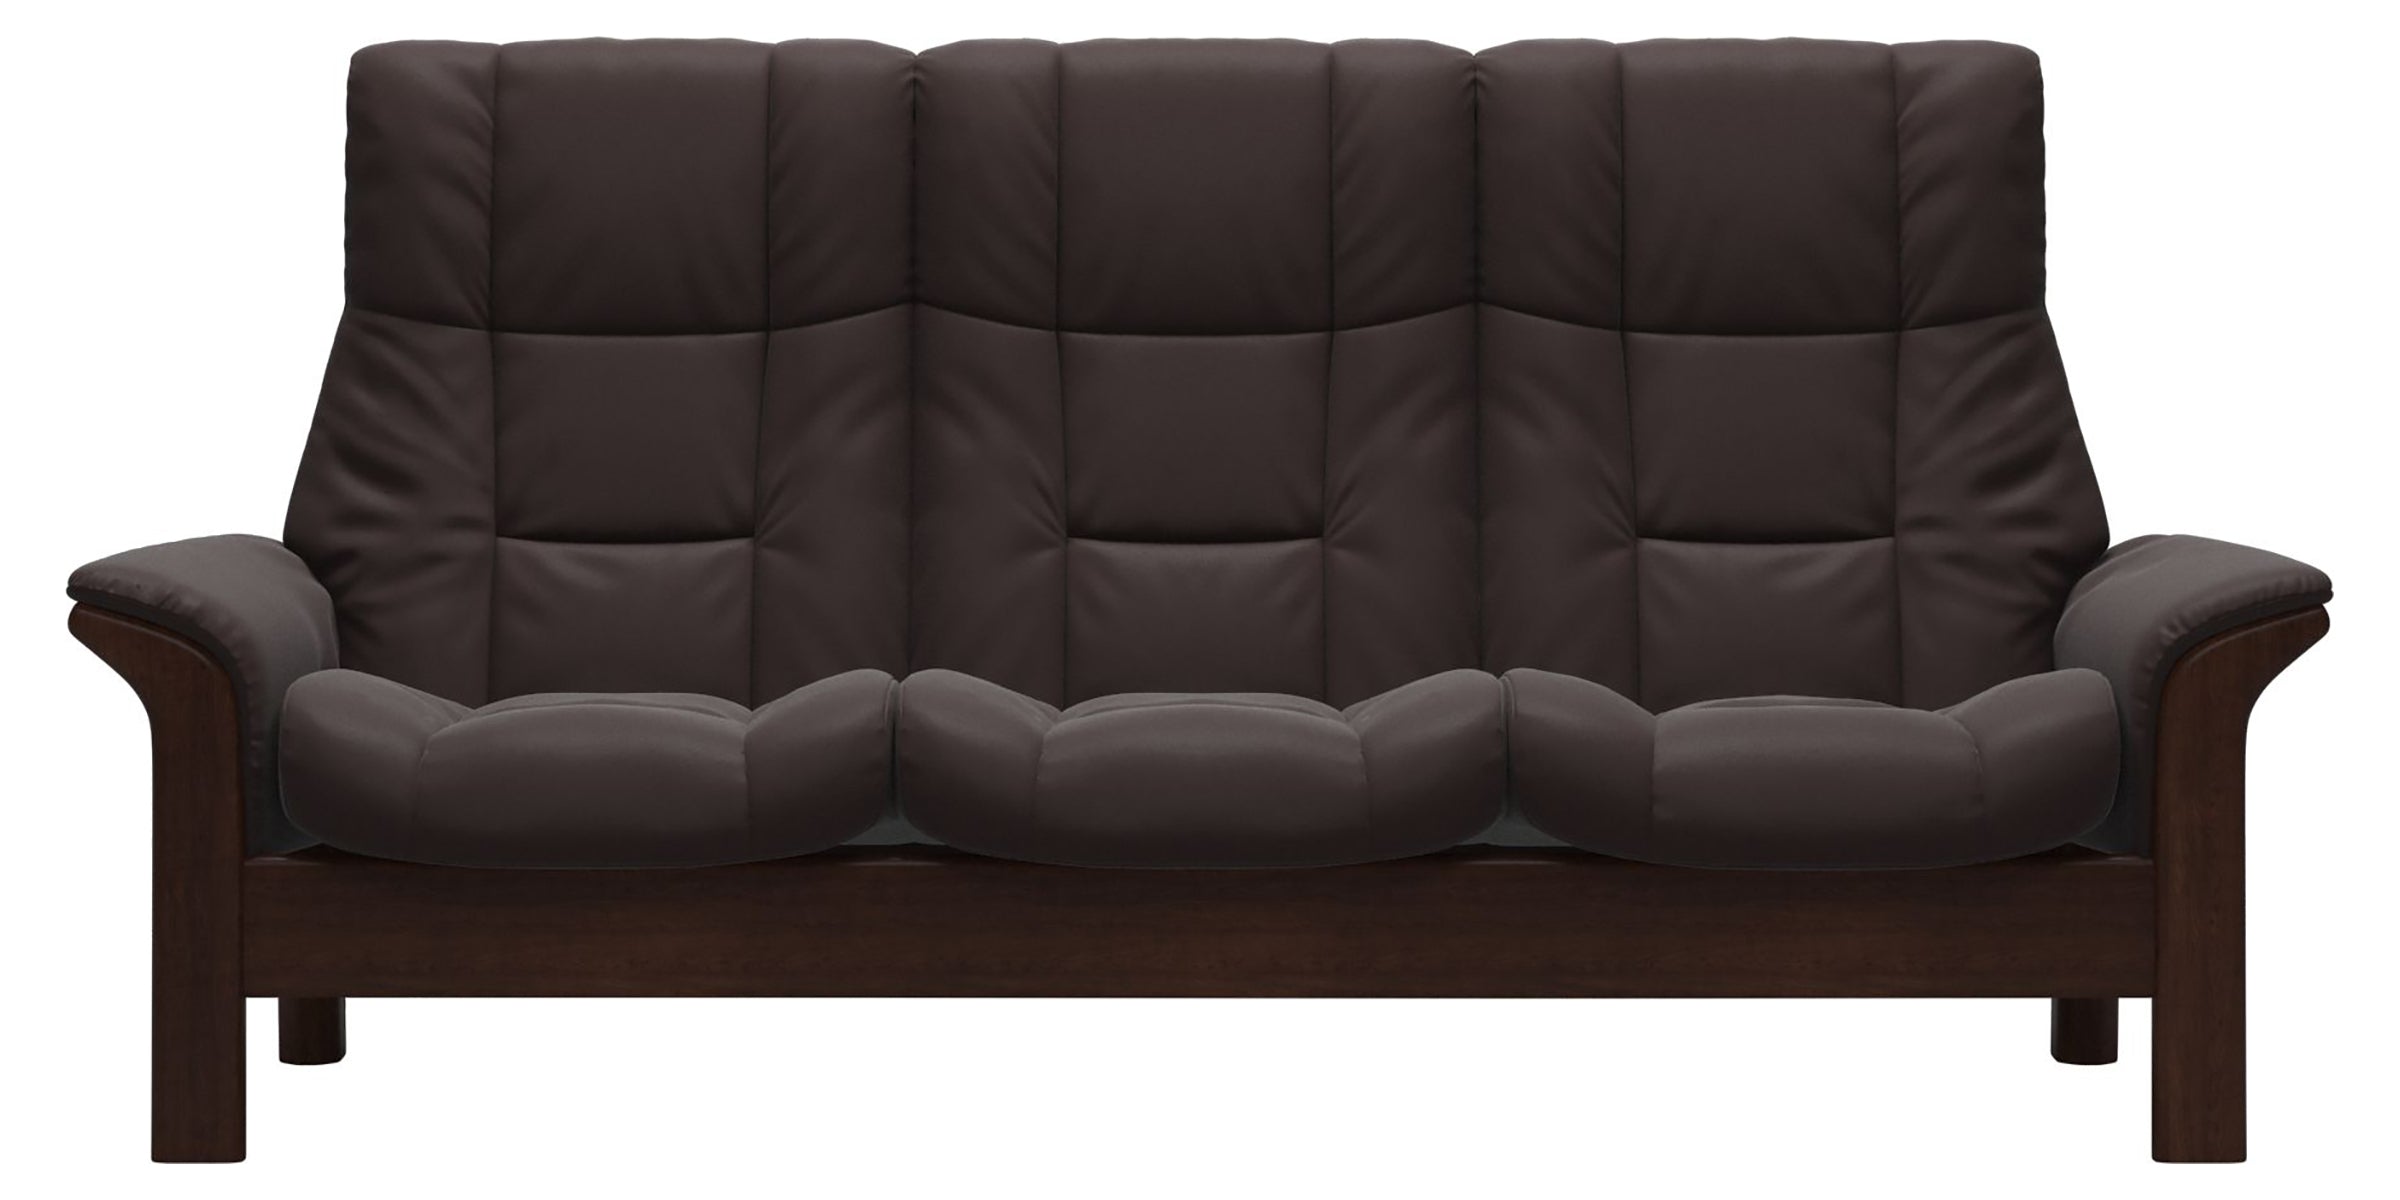 Paloma Leather Chocolate and Brown Base | Stressless Windsor 3-Seater High Back Sofa | Valley Ridge Furniture